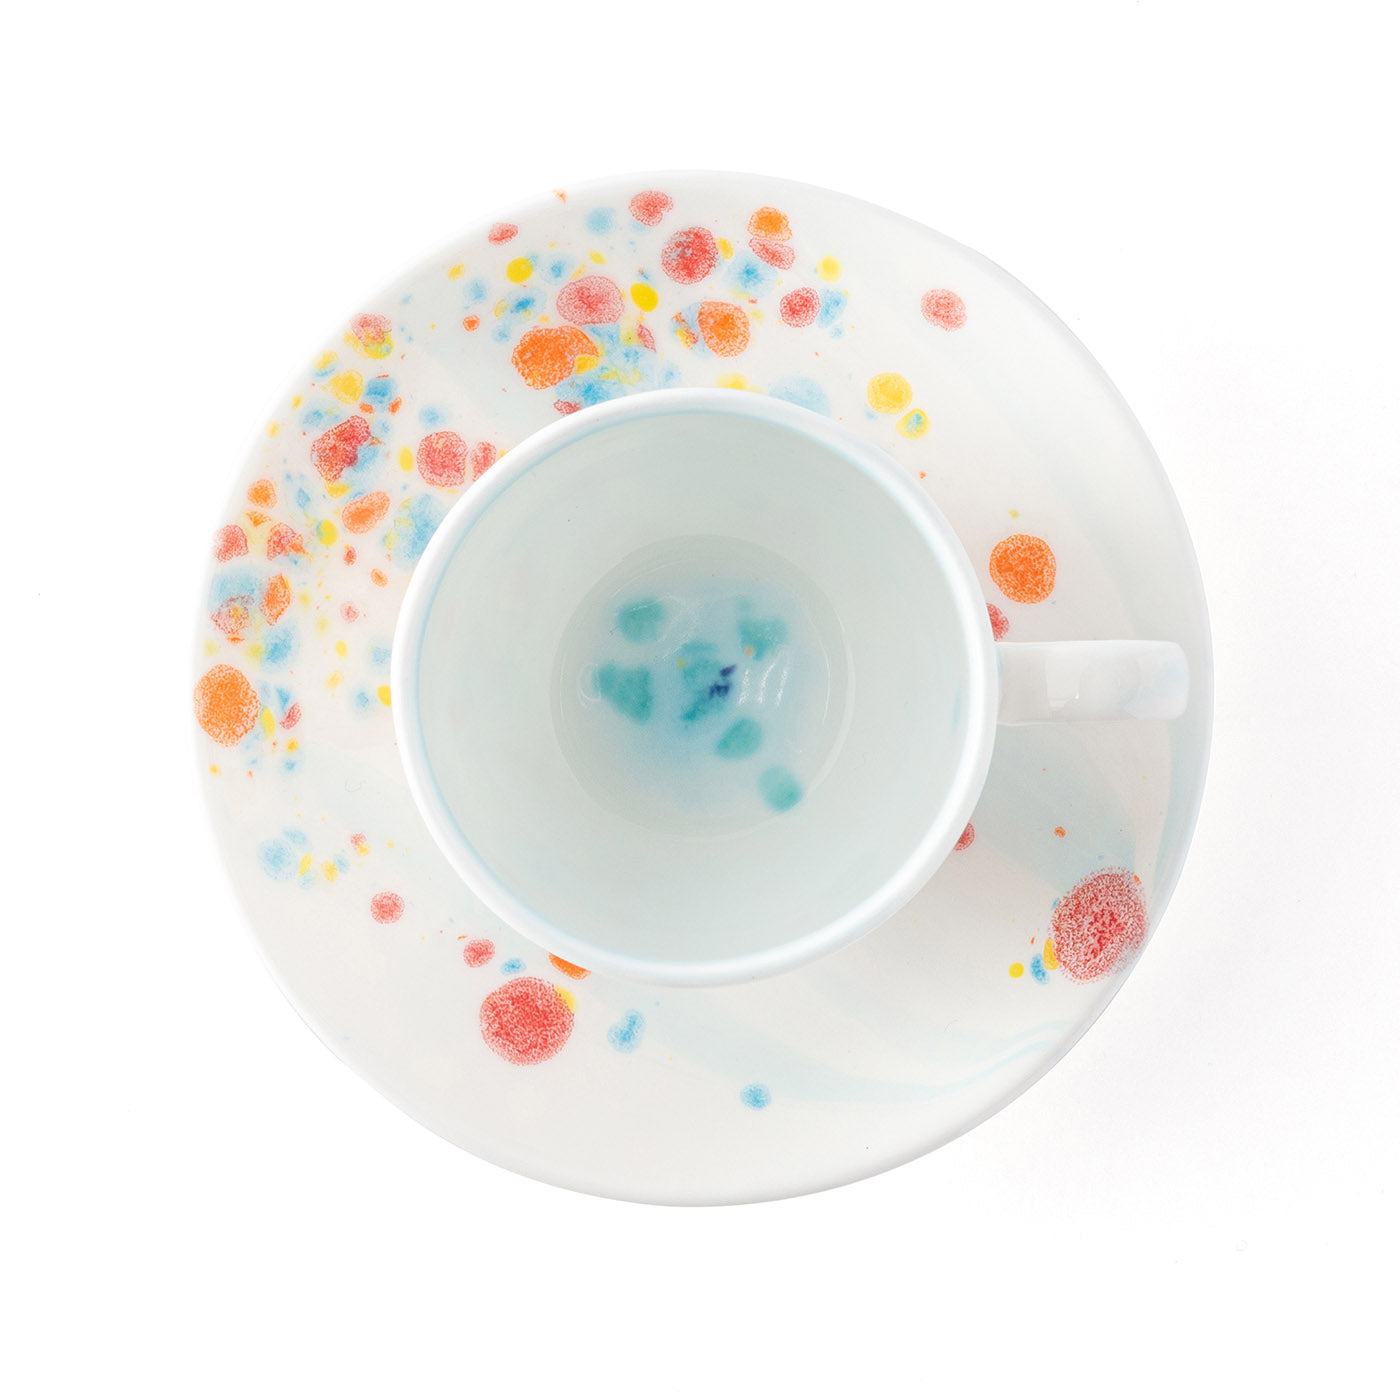 Confetti Set of 2 Tea Cups and Saucers - Alternative view 1